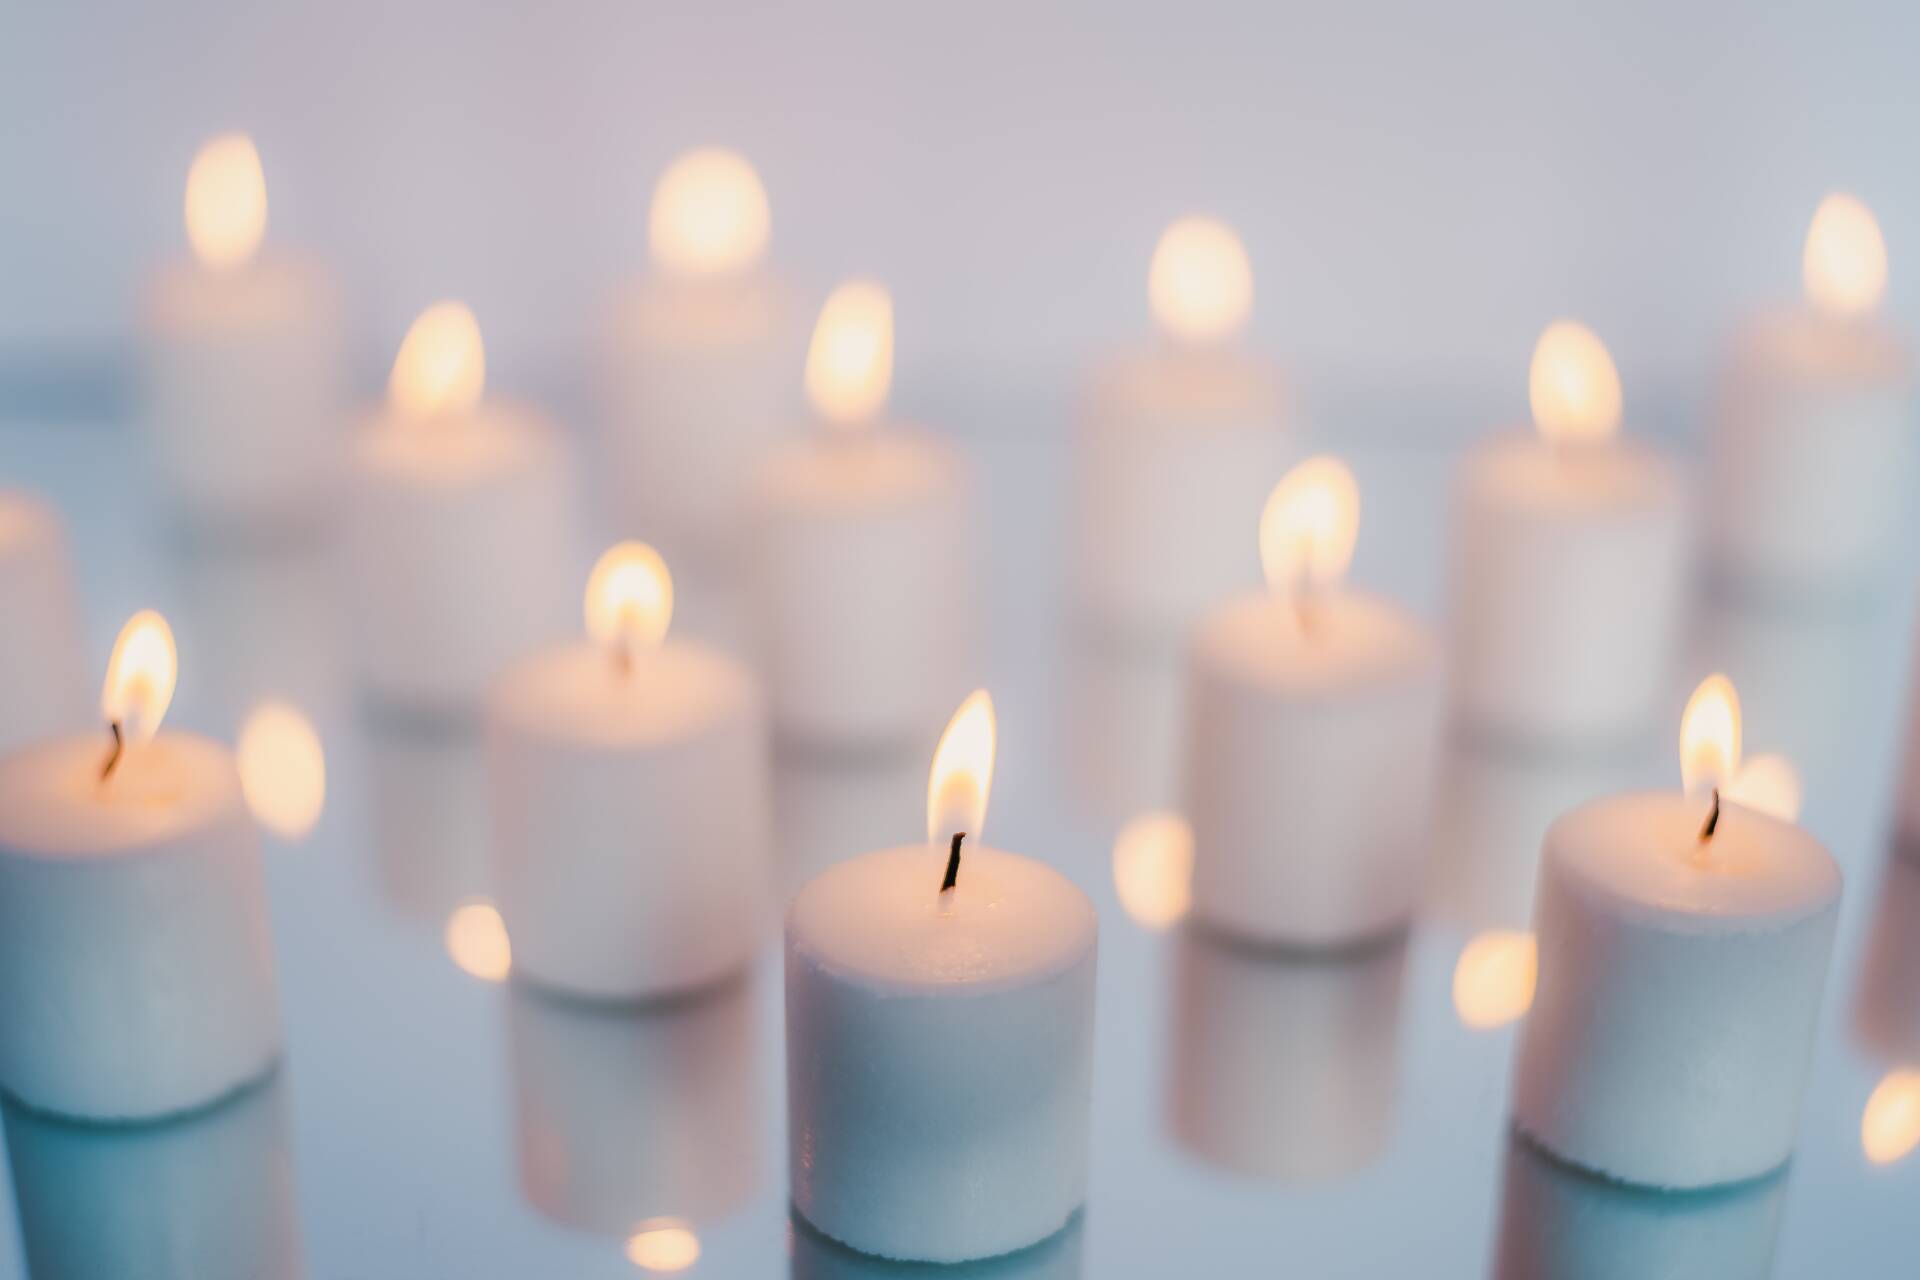 Several small, white candles, all lit.